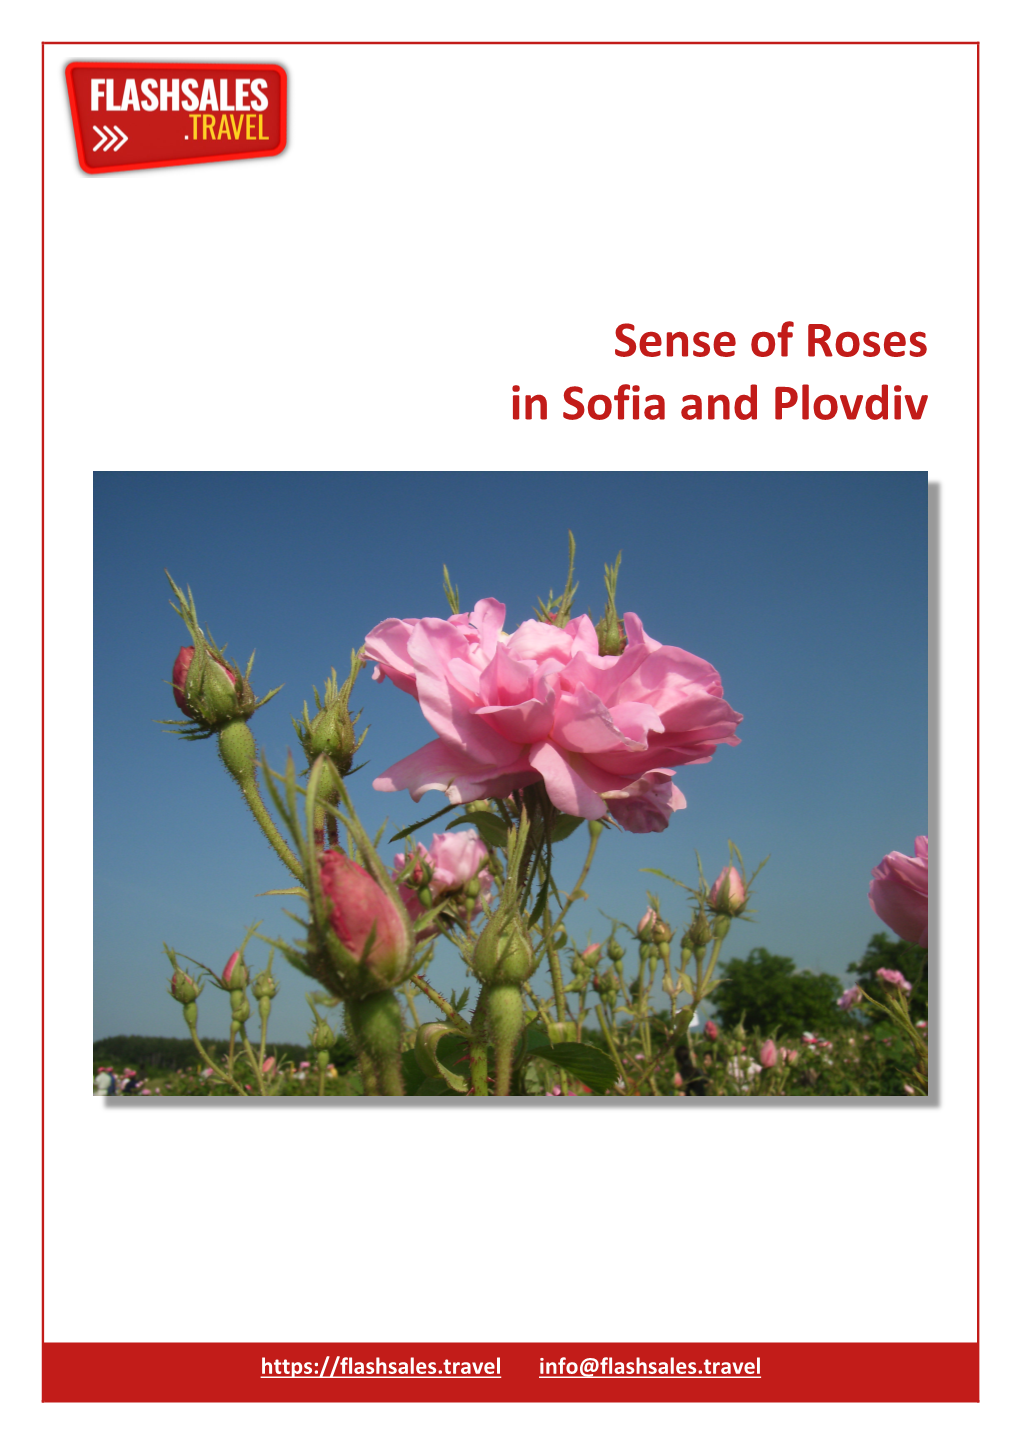 Sense of Roses in Sofia and Plovdiv